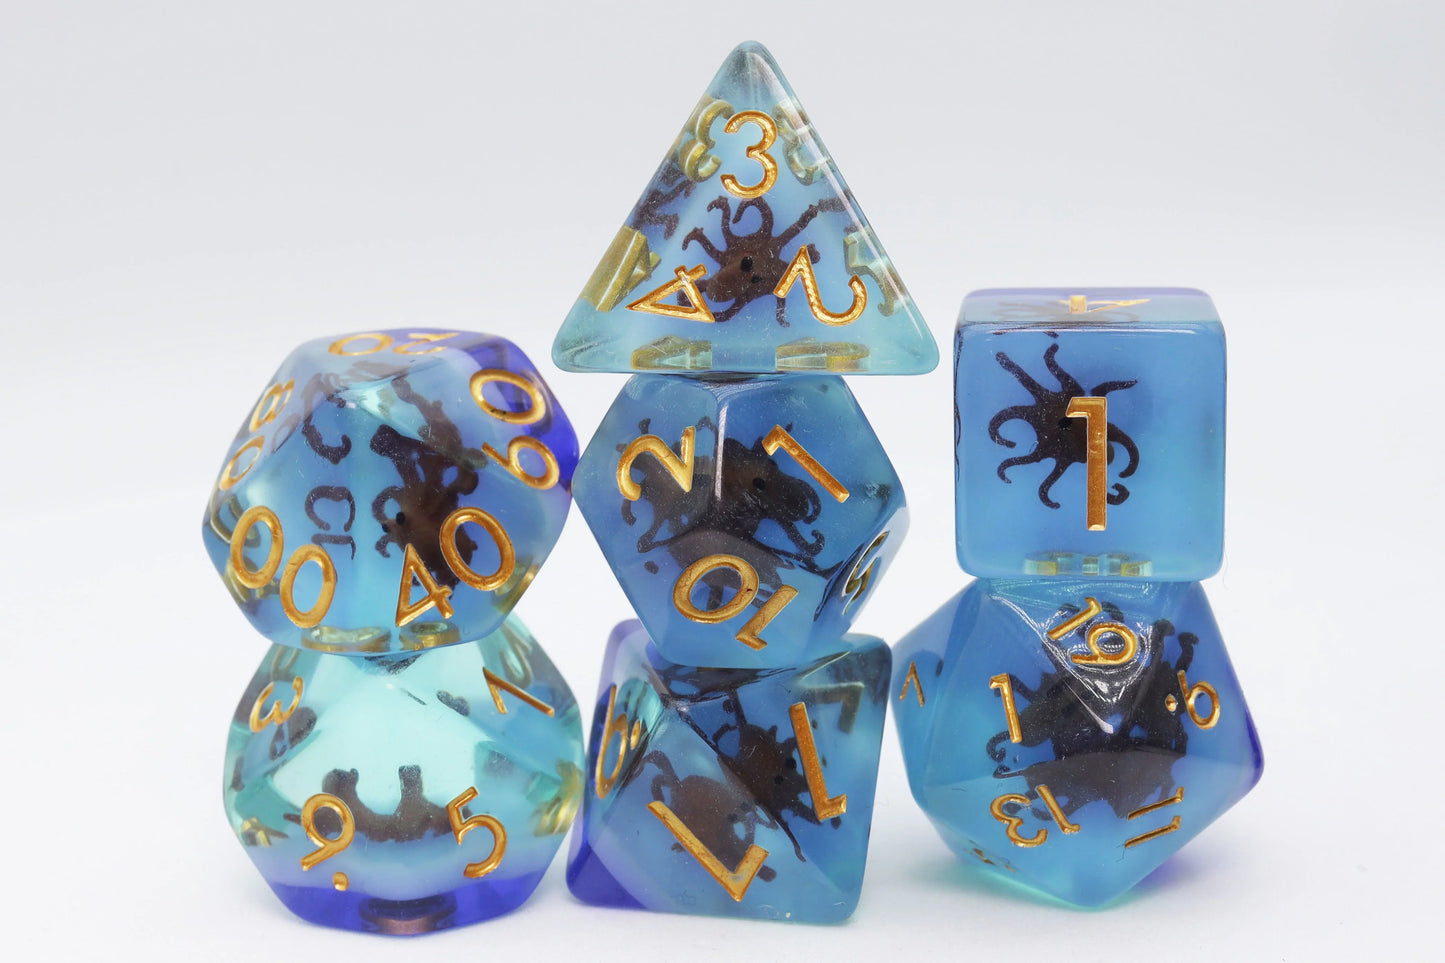 Foam Brain Games Polyhedral Novelty Dice Set of 7